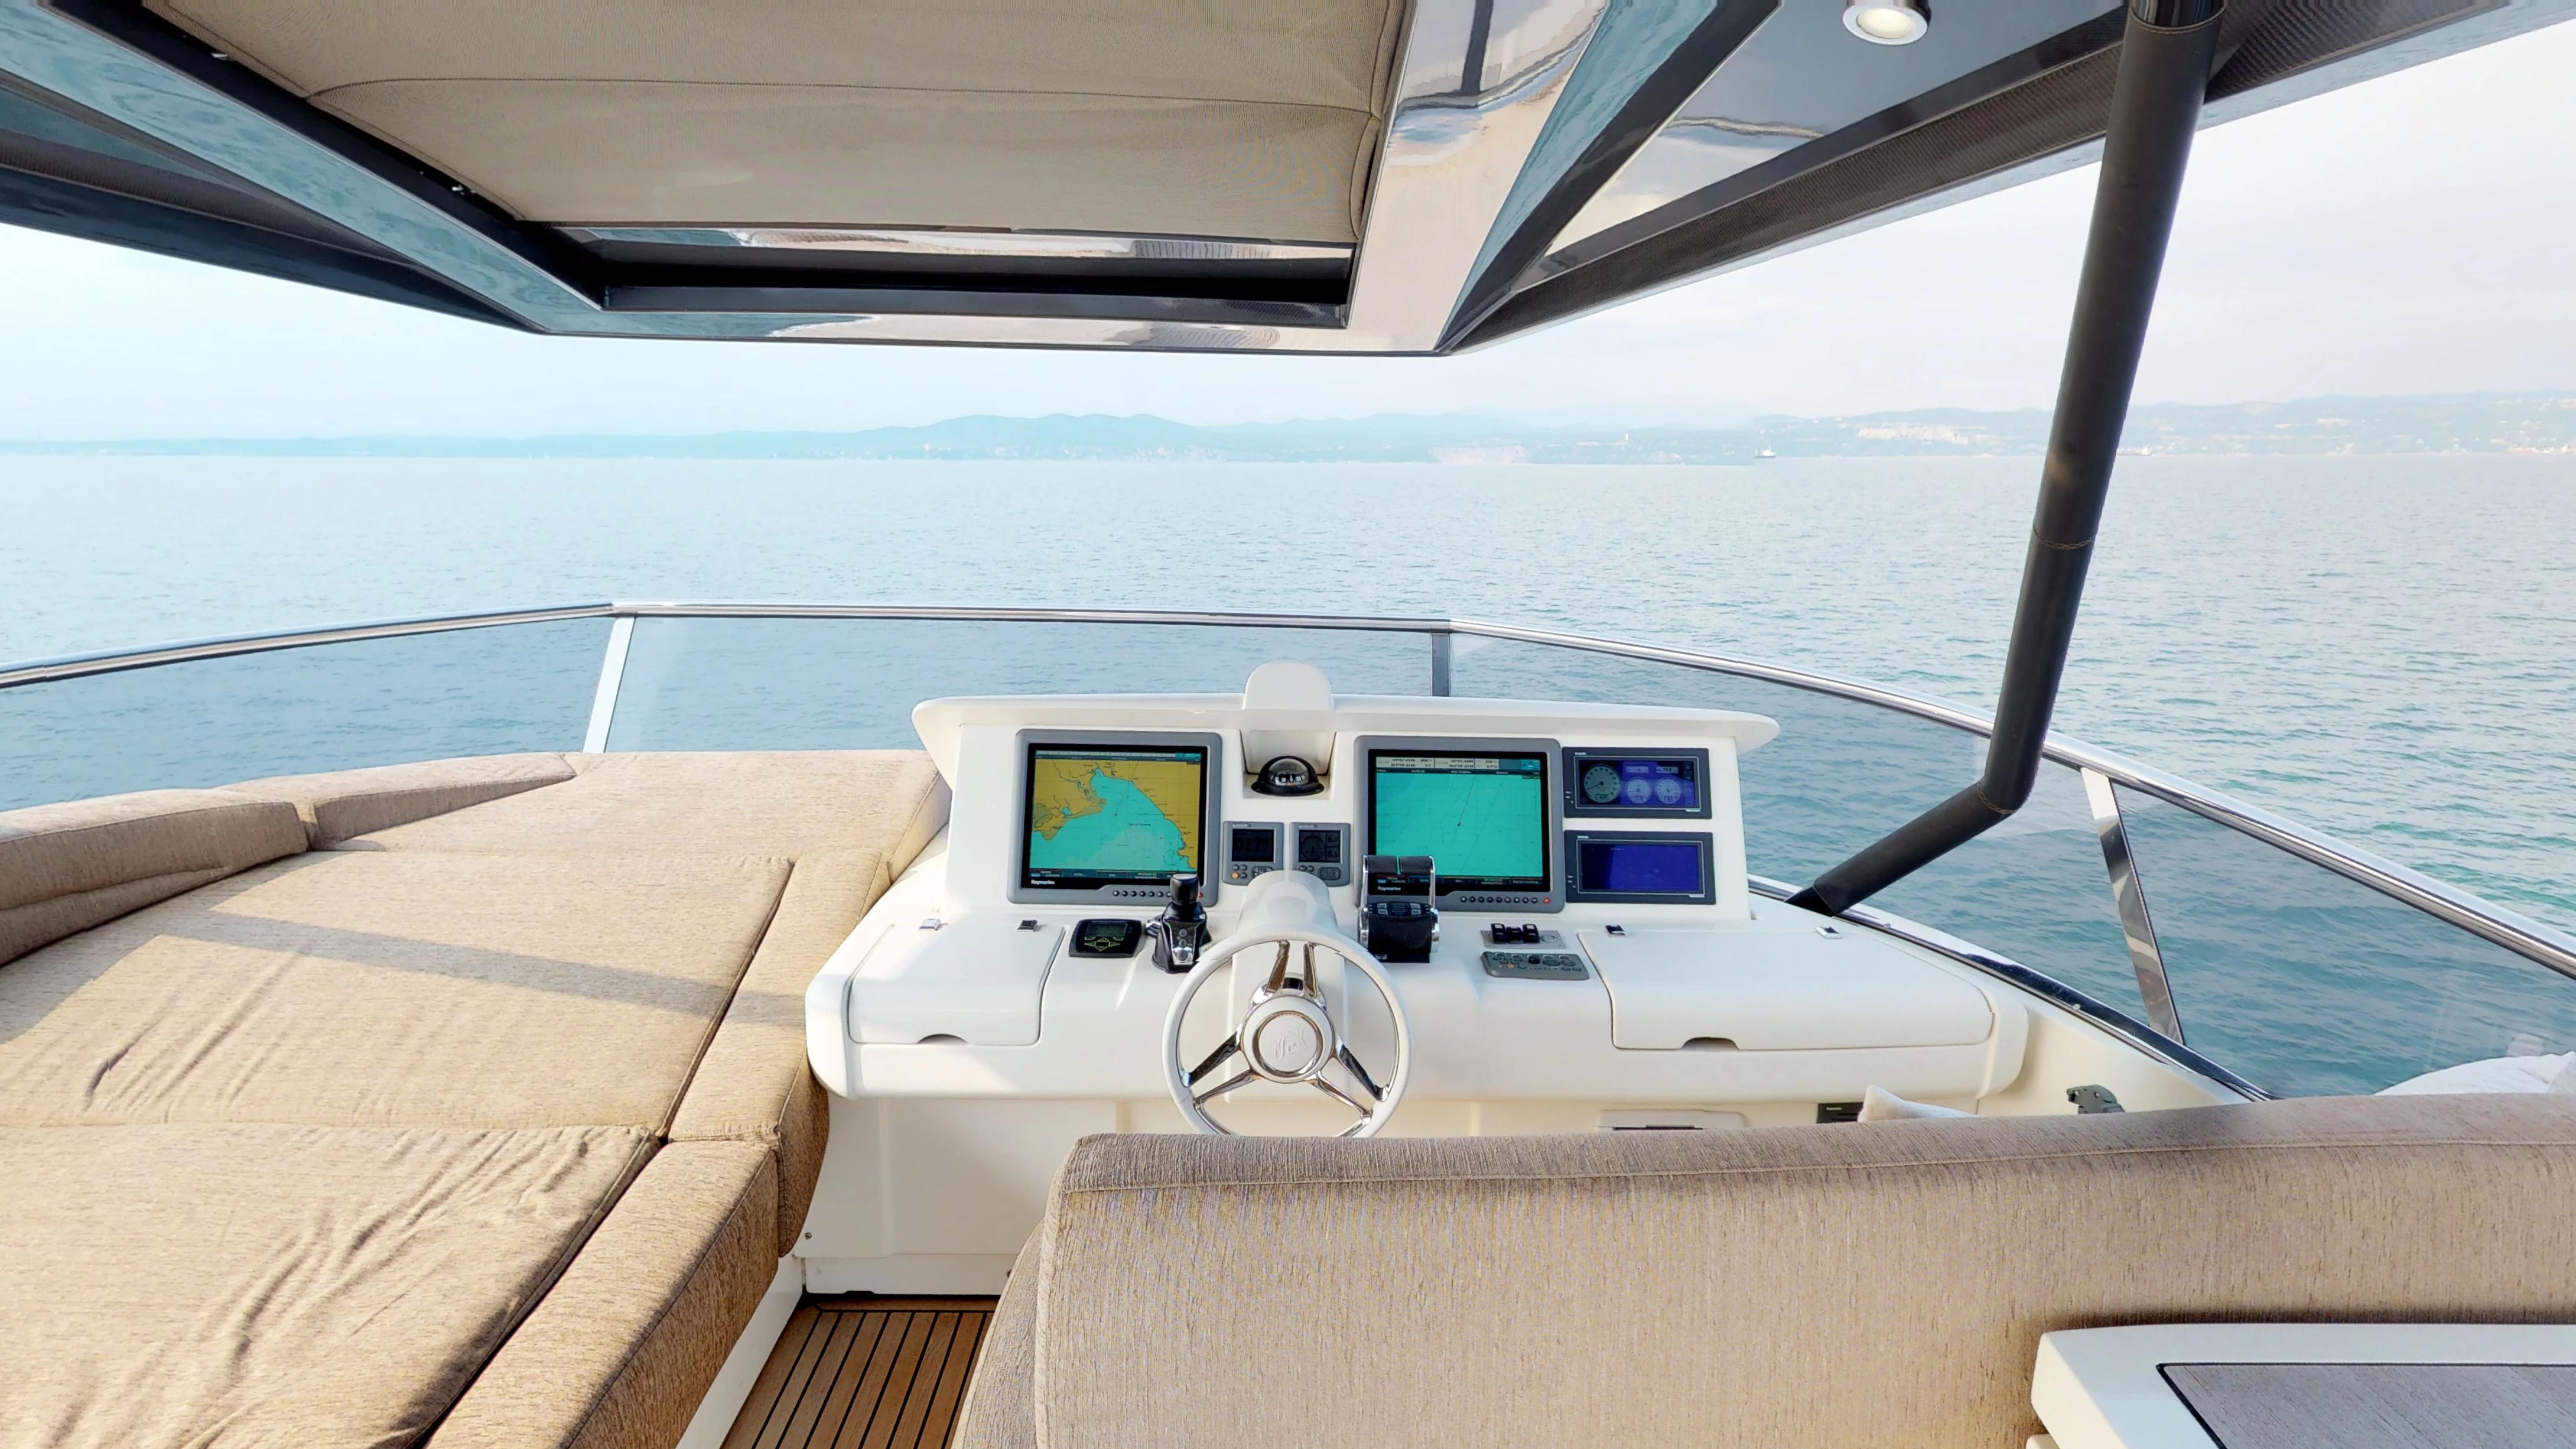 Monte Carlo 76 Yacht For Sale Helm Station